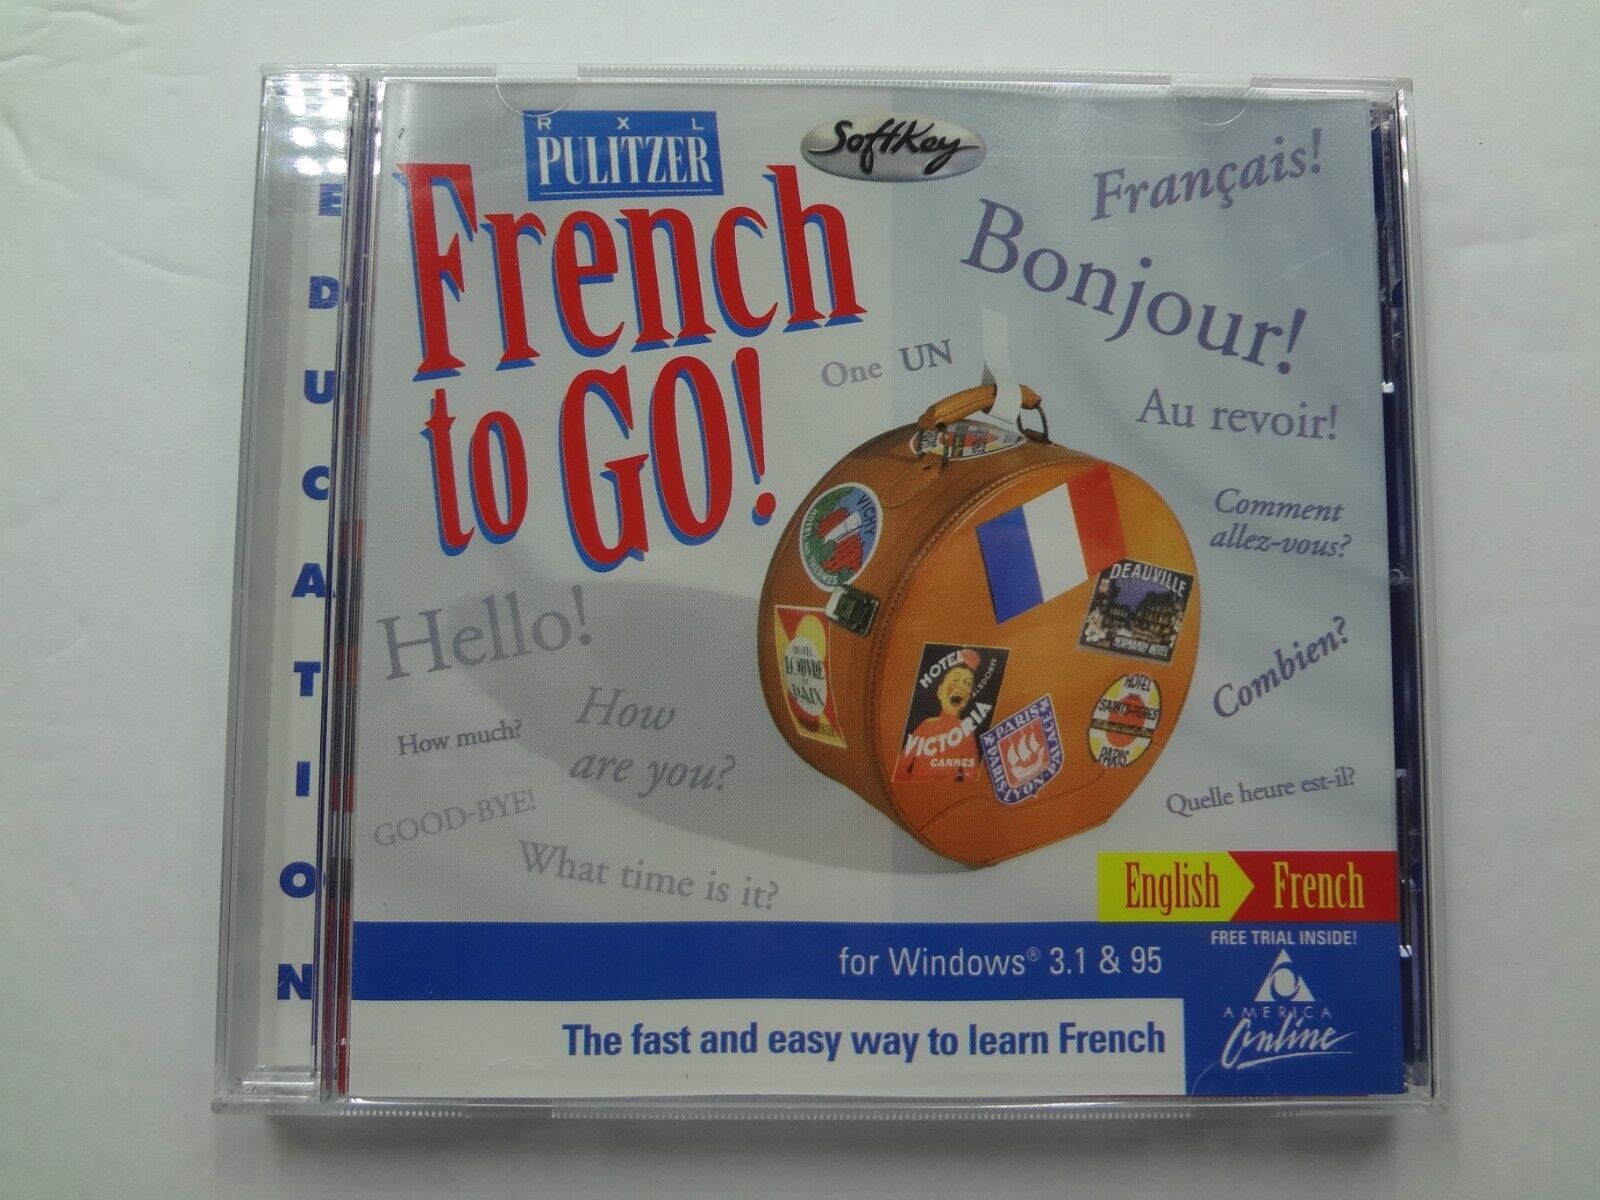 Pulitzer French To Go - The Fast Easy Way To Learn French - Windows 3.1 & 95